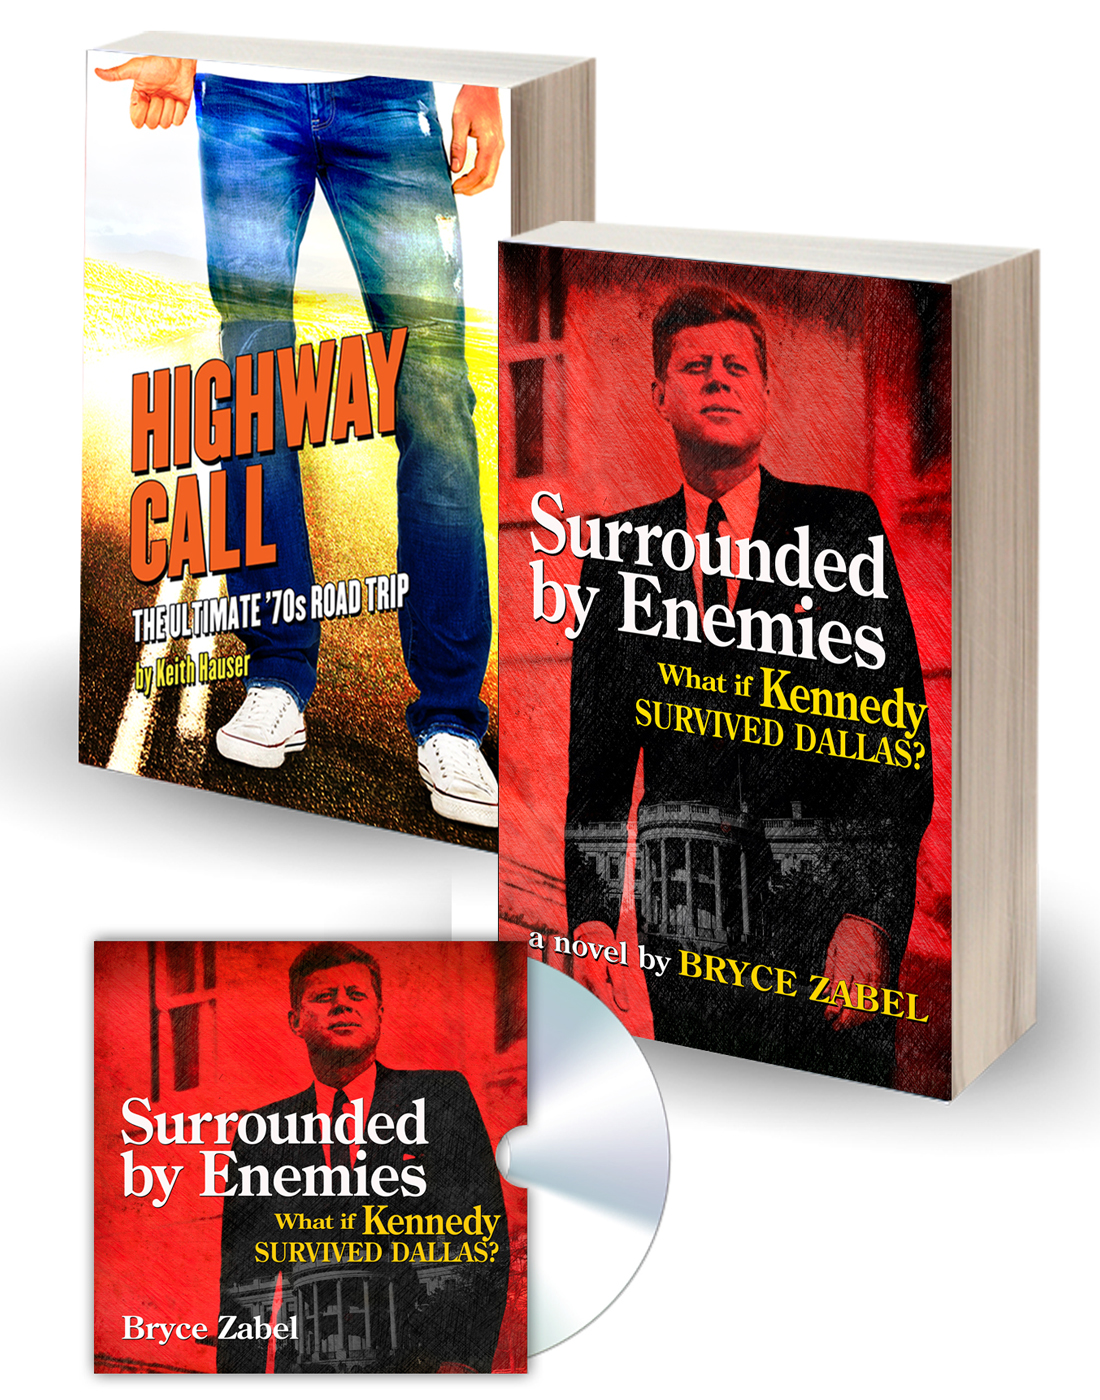 Highway Call and Surrounded by Enemies books